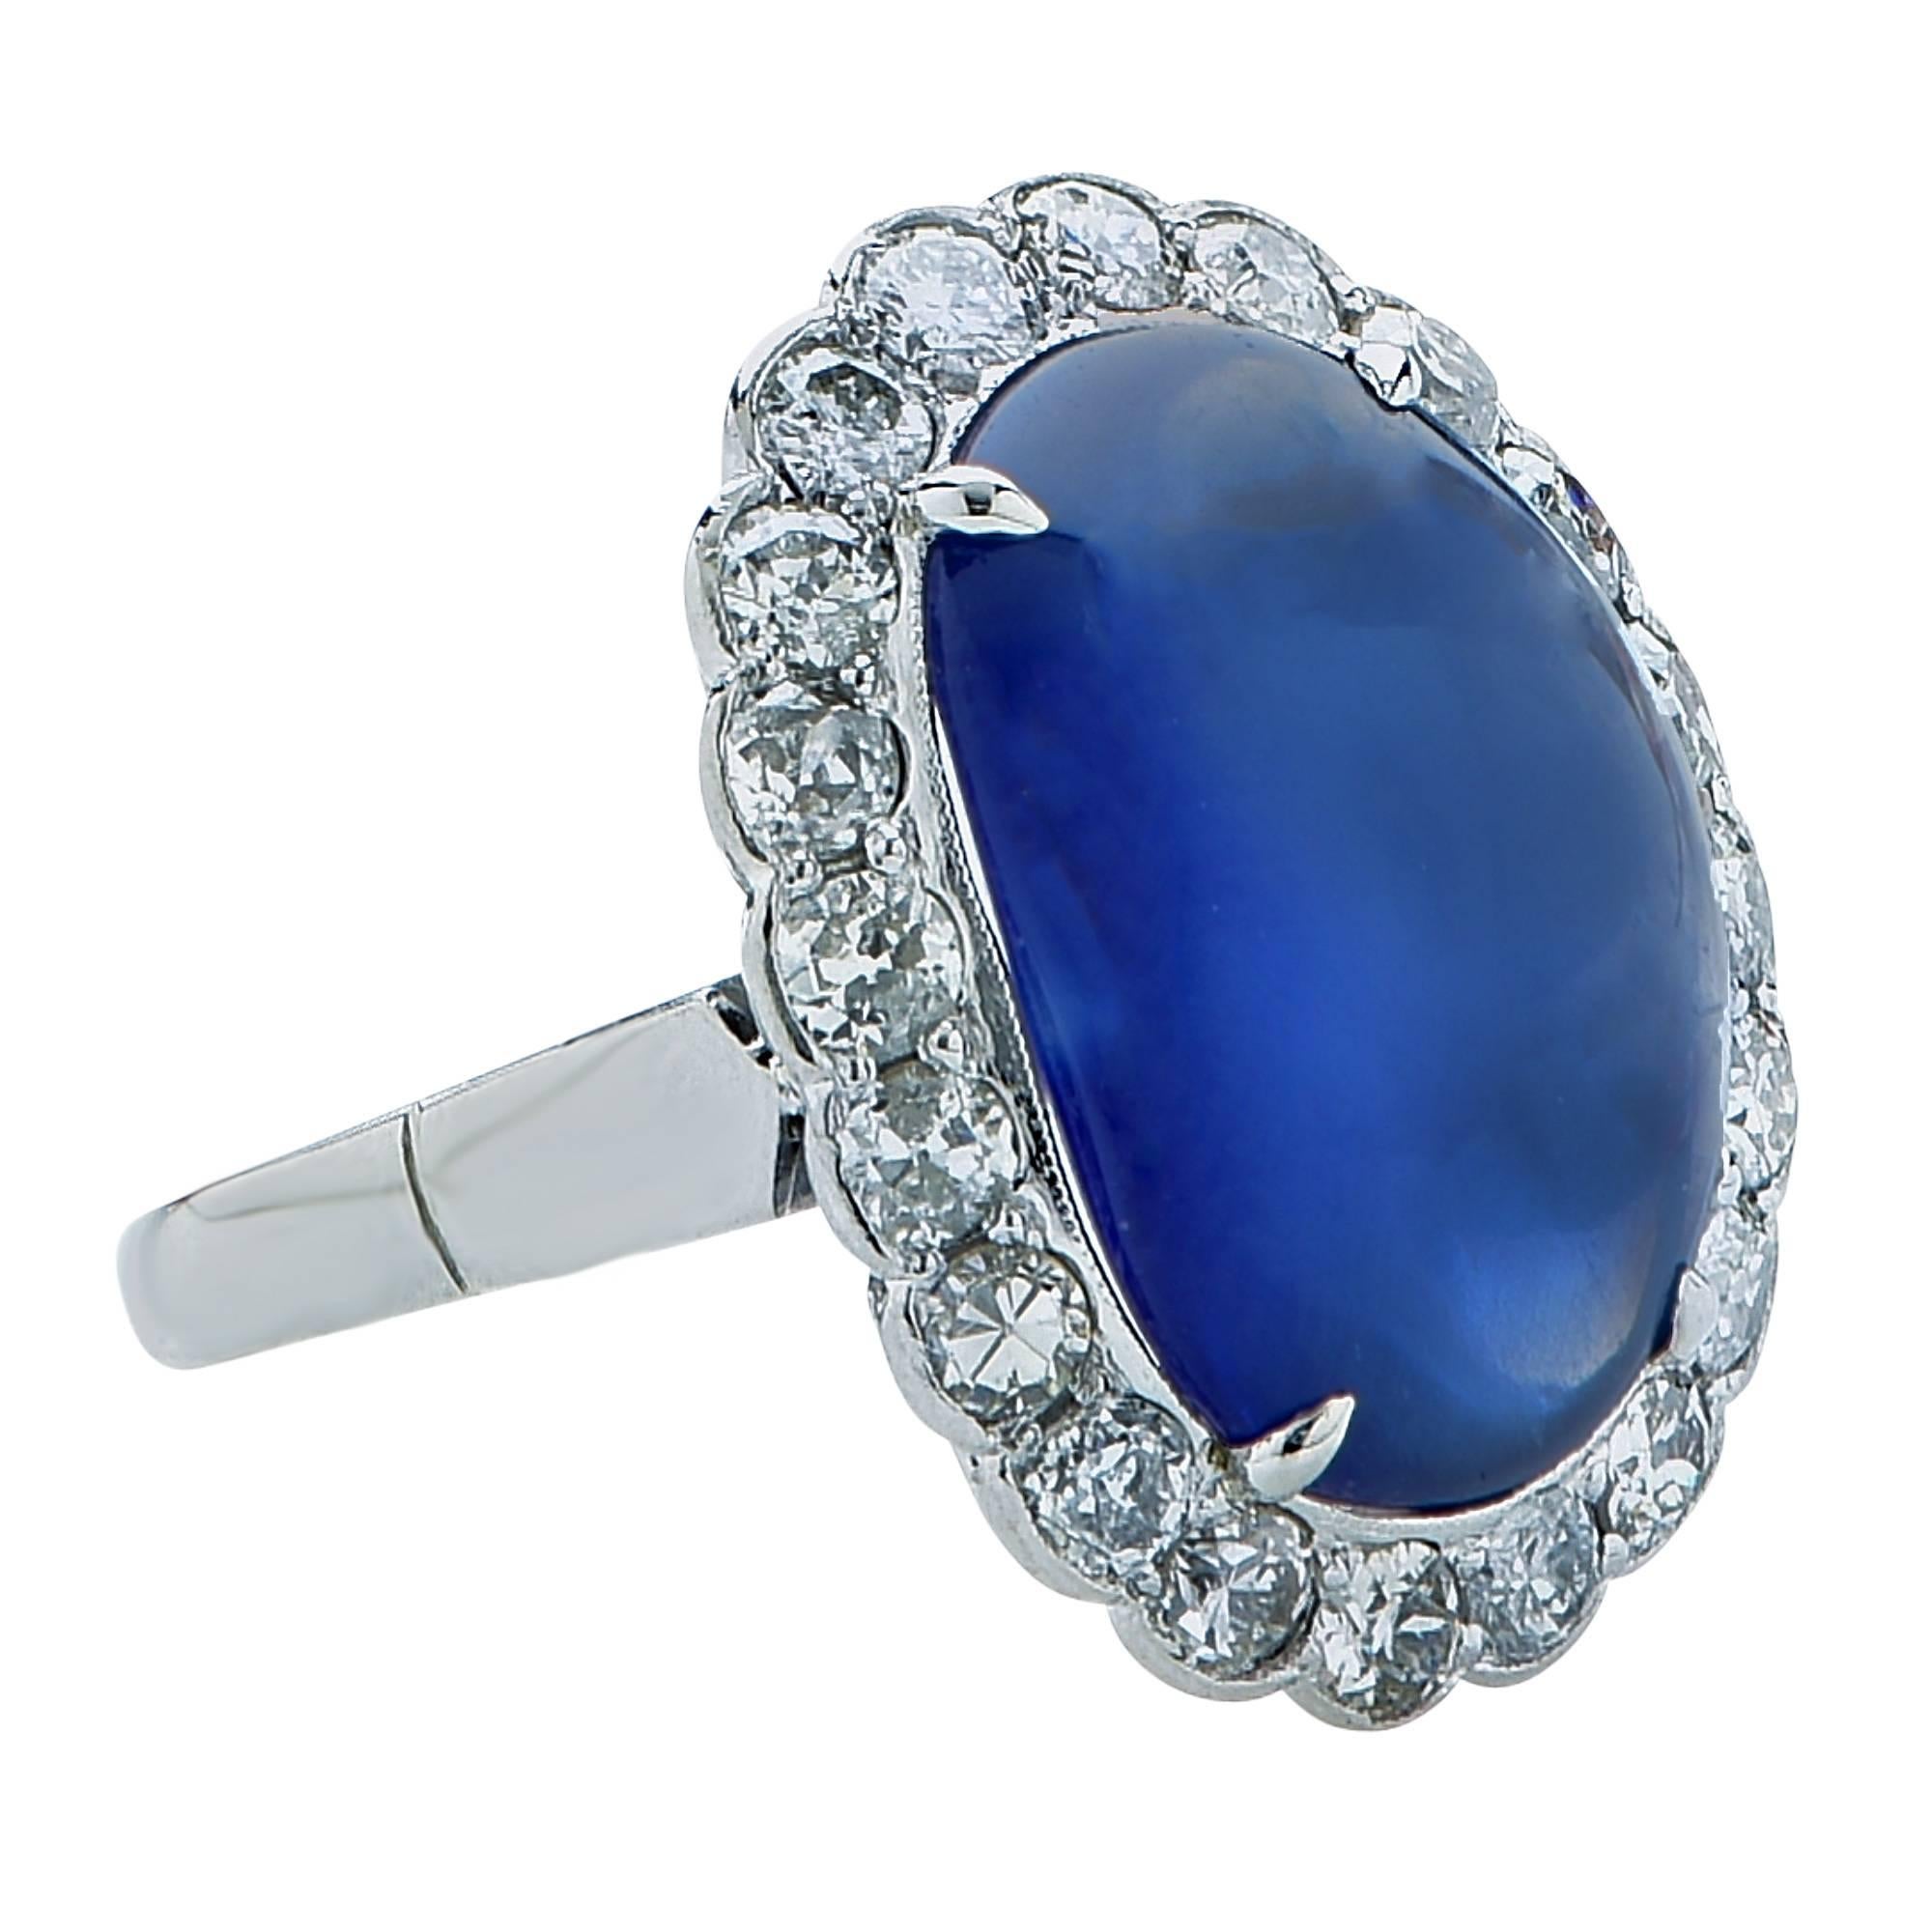 10.20ct unheated Burma sapphire cabochon oval with a royal blue velvety color set in to a platinum ring surrounded by 20 round brilliant cut diamonds.

Ring size: 7 (can be sized up or down)

This sapphire and diamond ring is accompanied by a